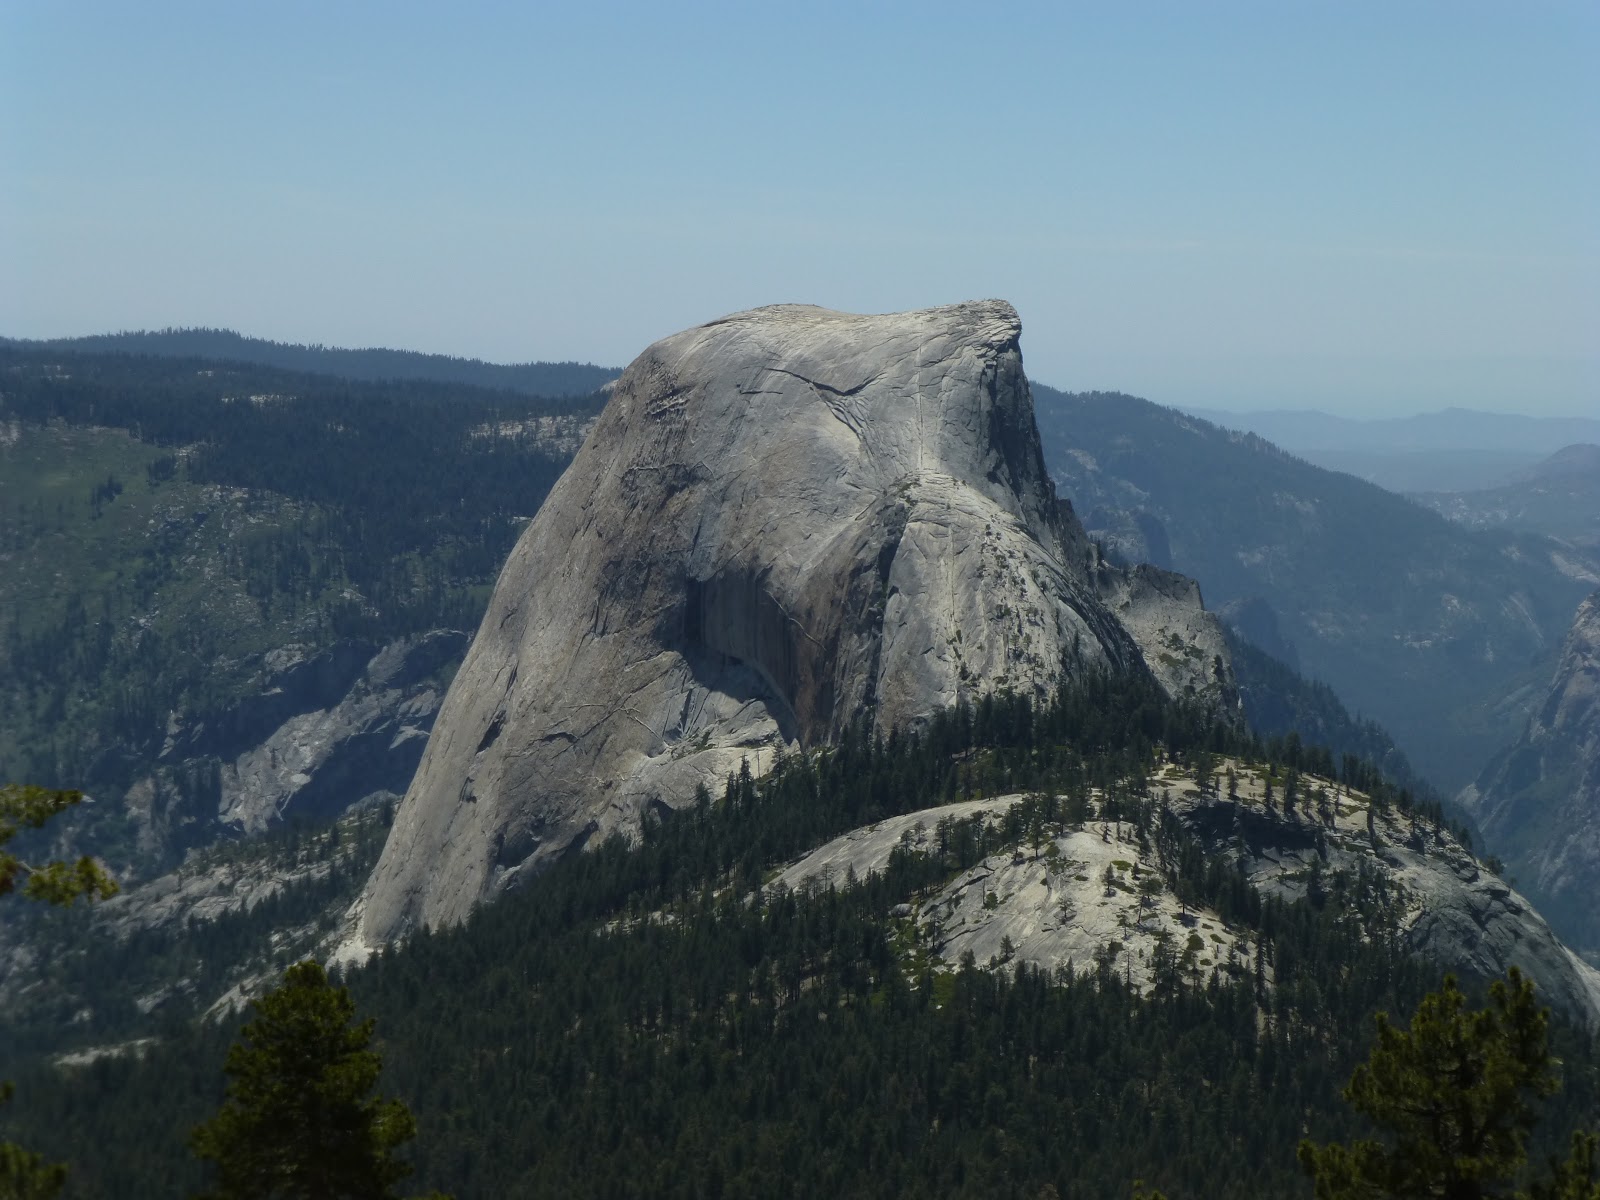 And a close up on Half Dome. Seems scary.